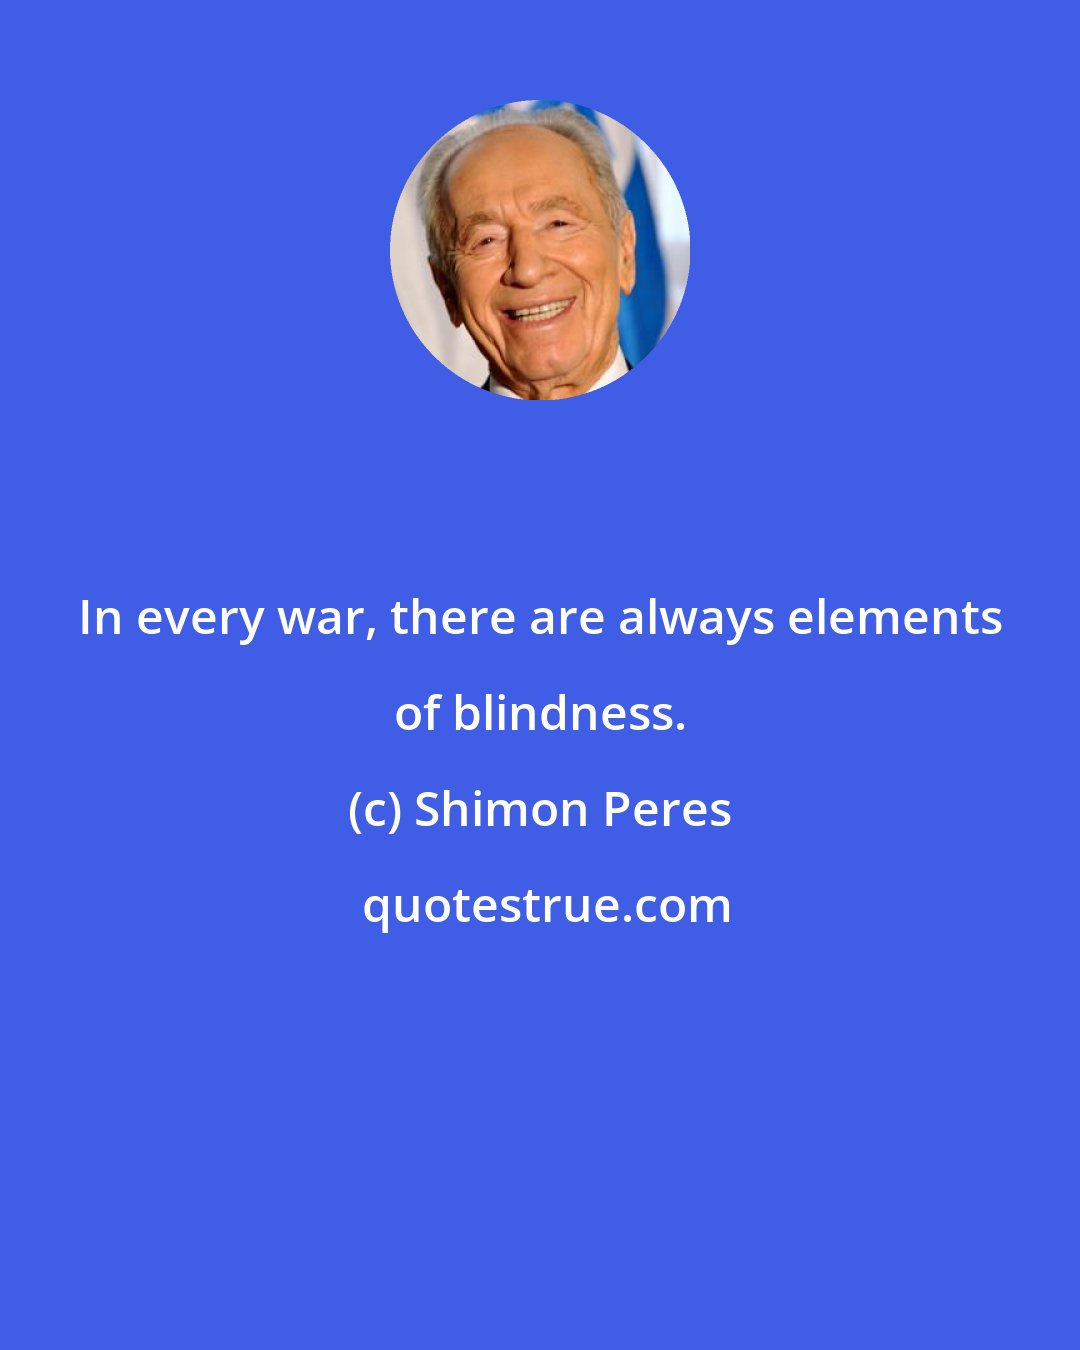 Shimon Peres: In every war, there are always elements of blindness.